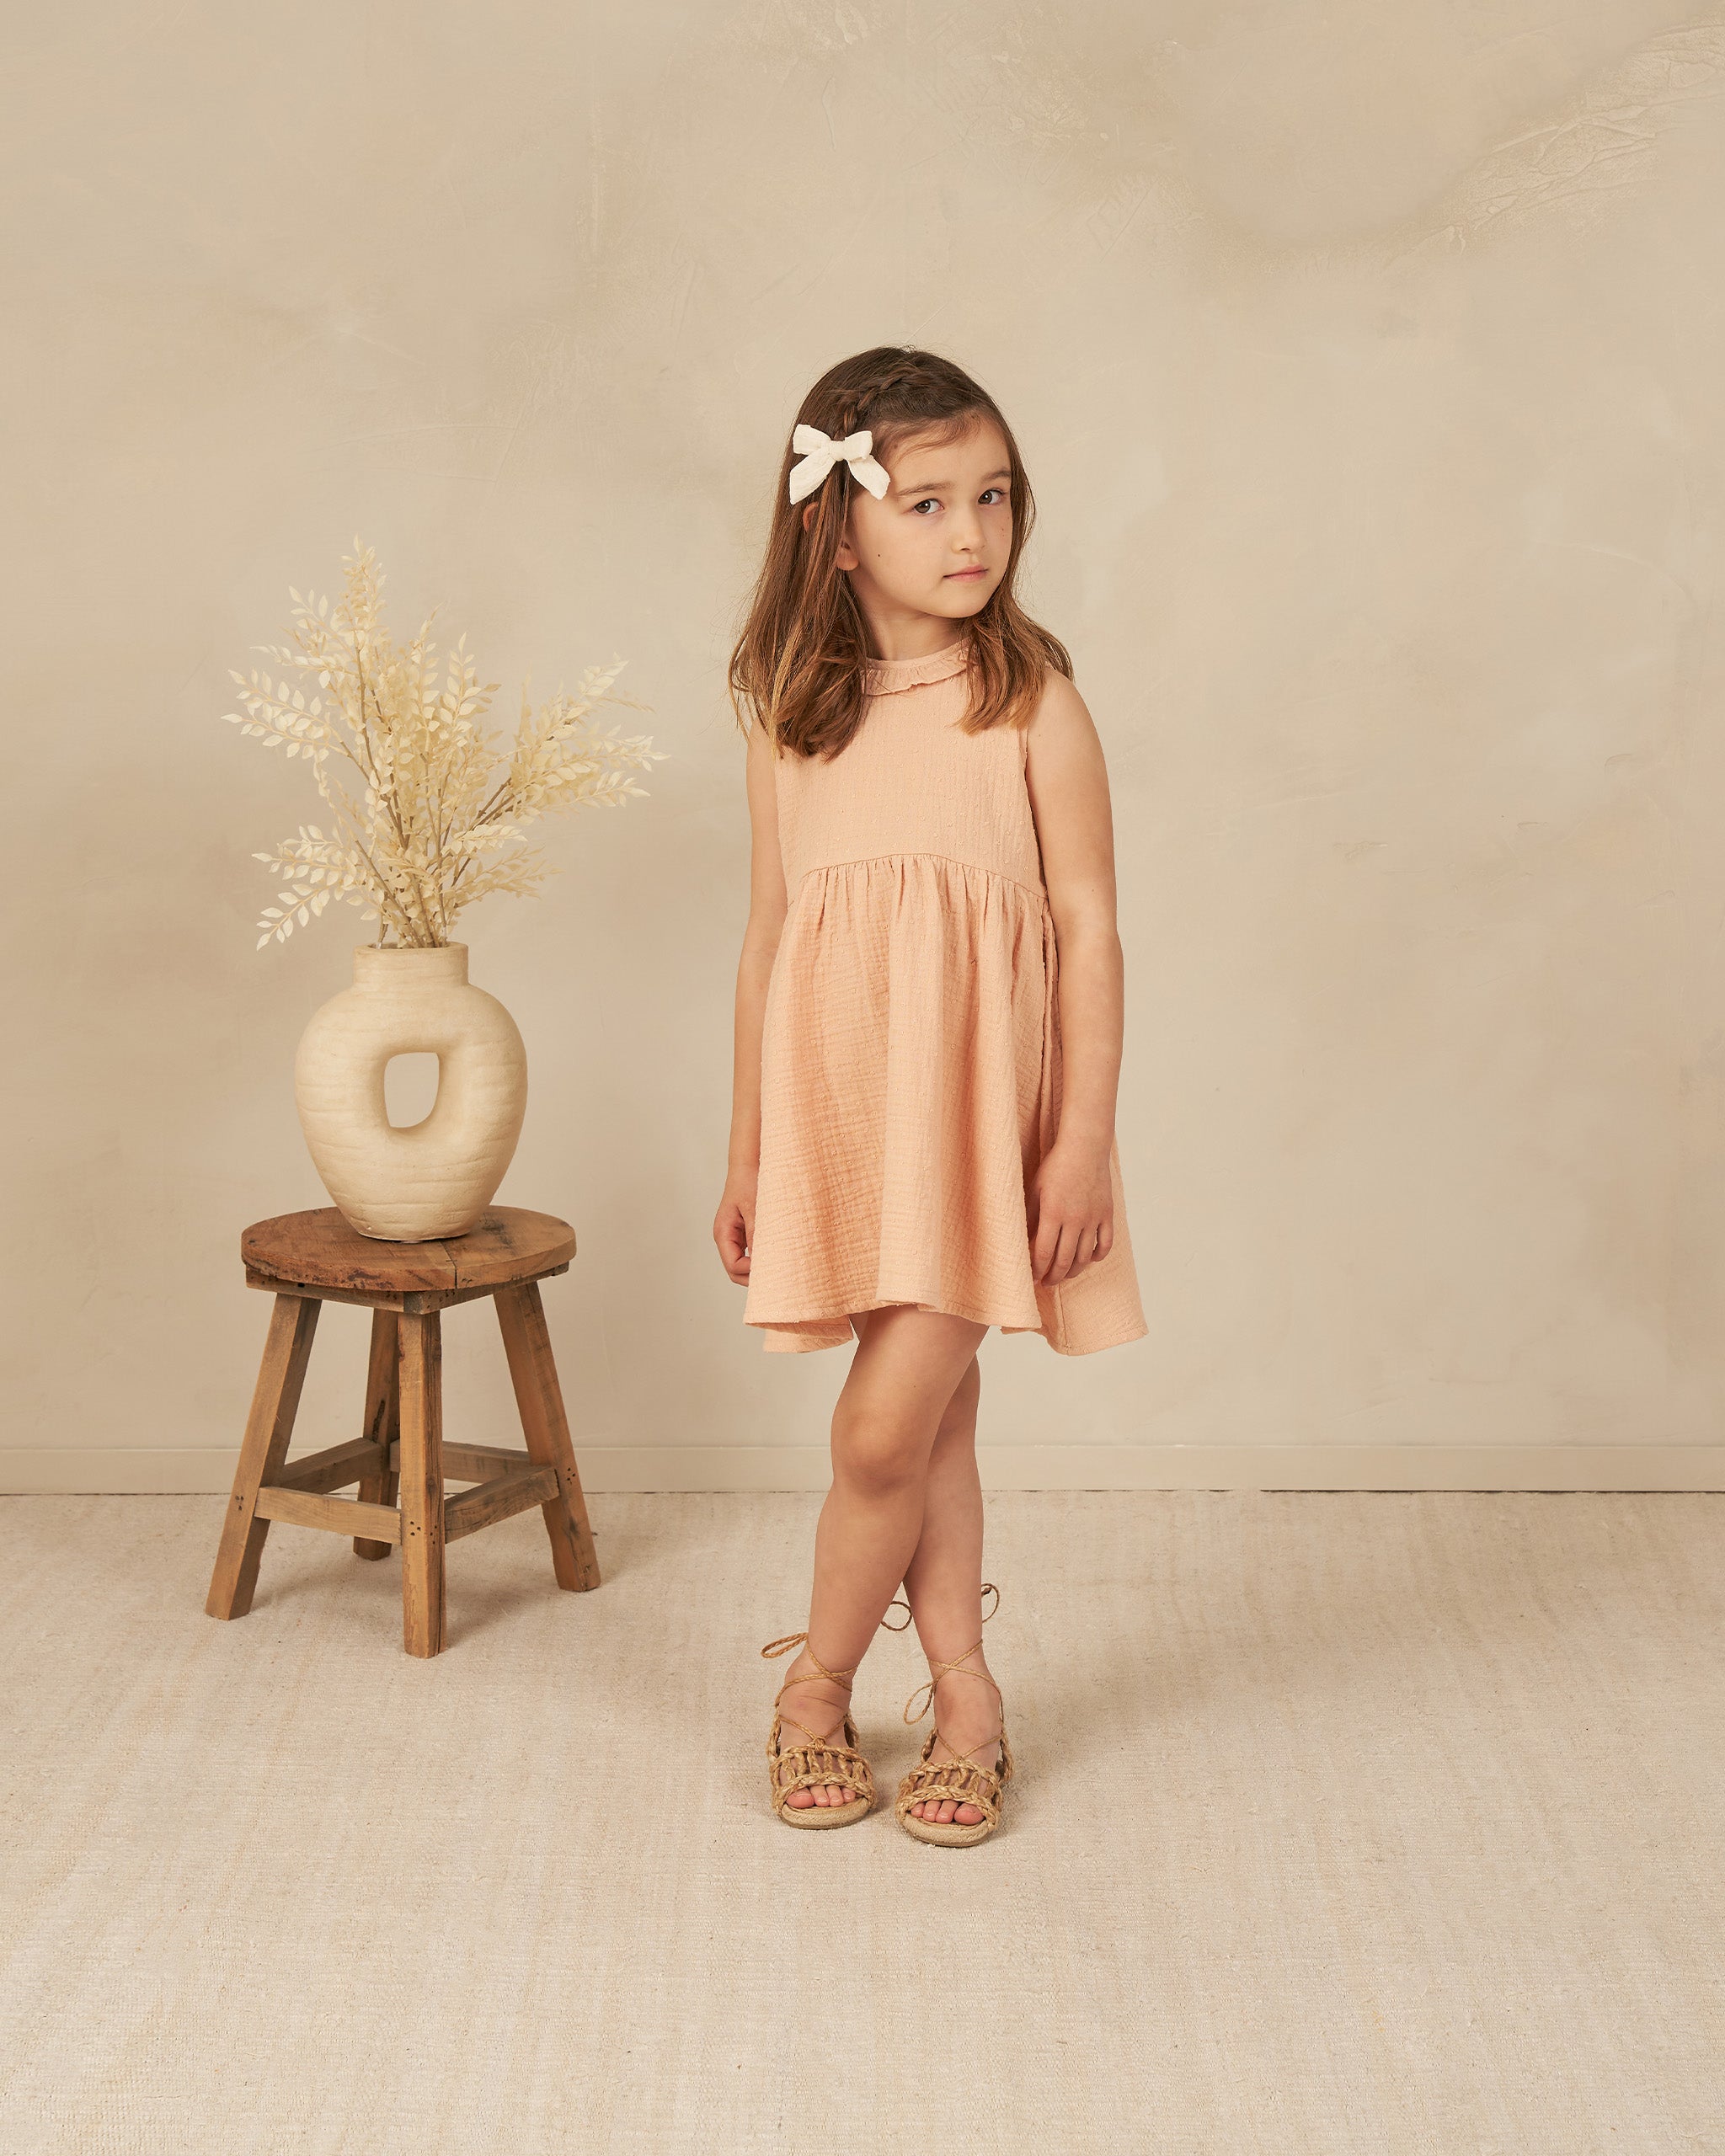 Marie Dress || Apricot - Rylee + Cru | Kids Clothes | Trendy Baby Clothes | Modern Infant Outfits |